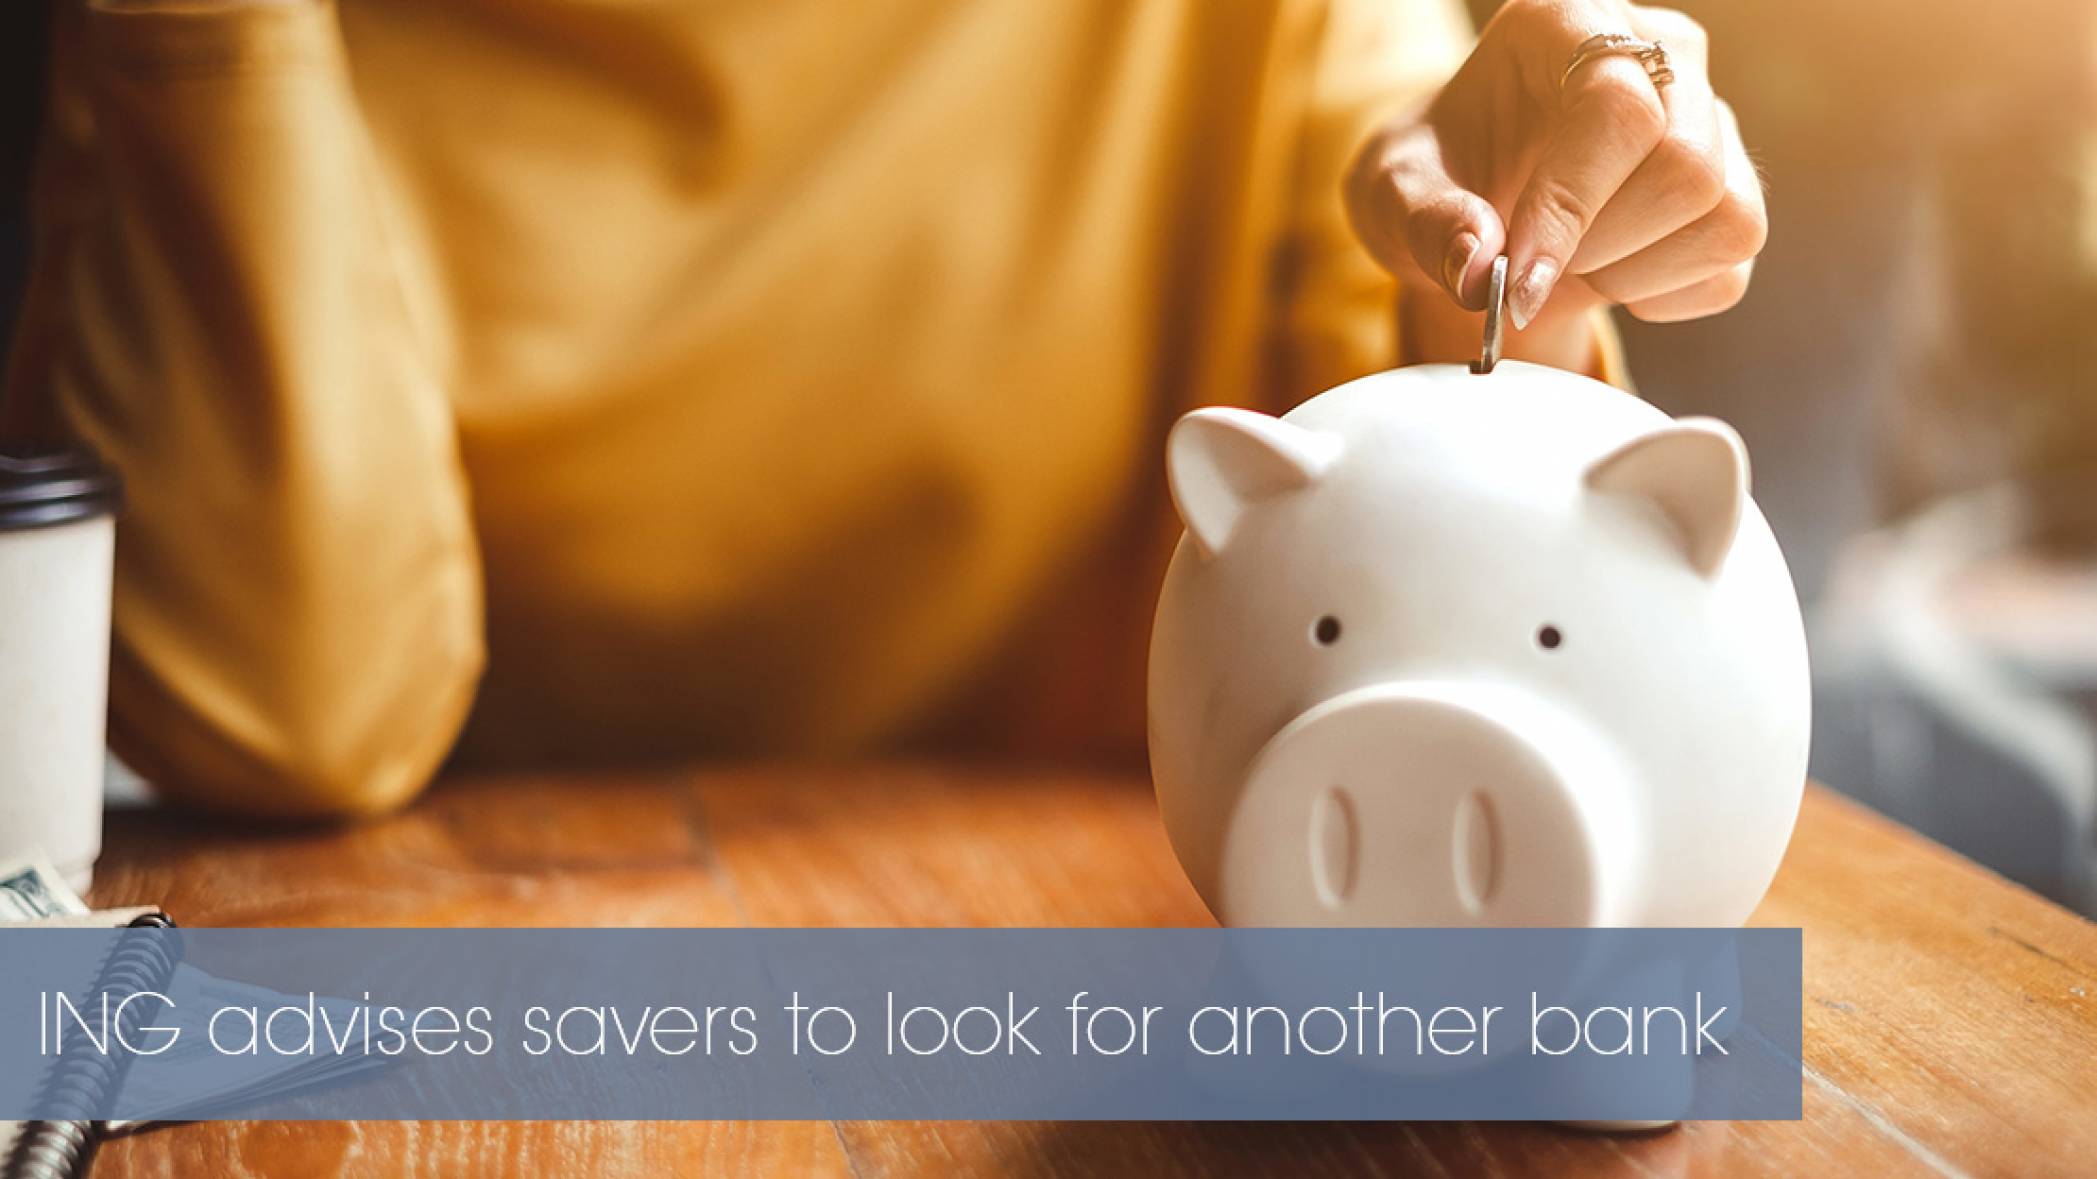 ING advises savers to look for another bank